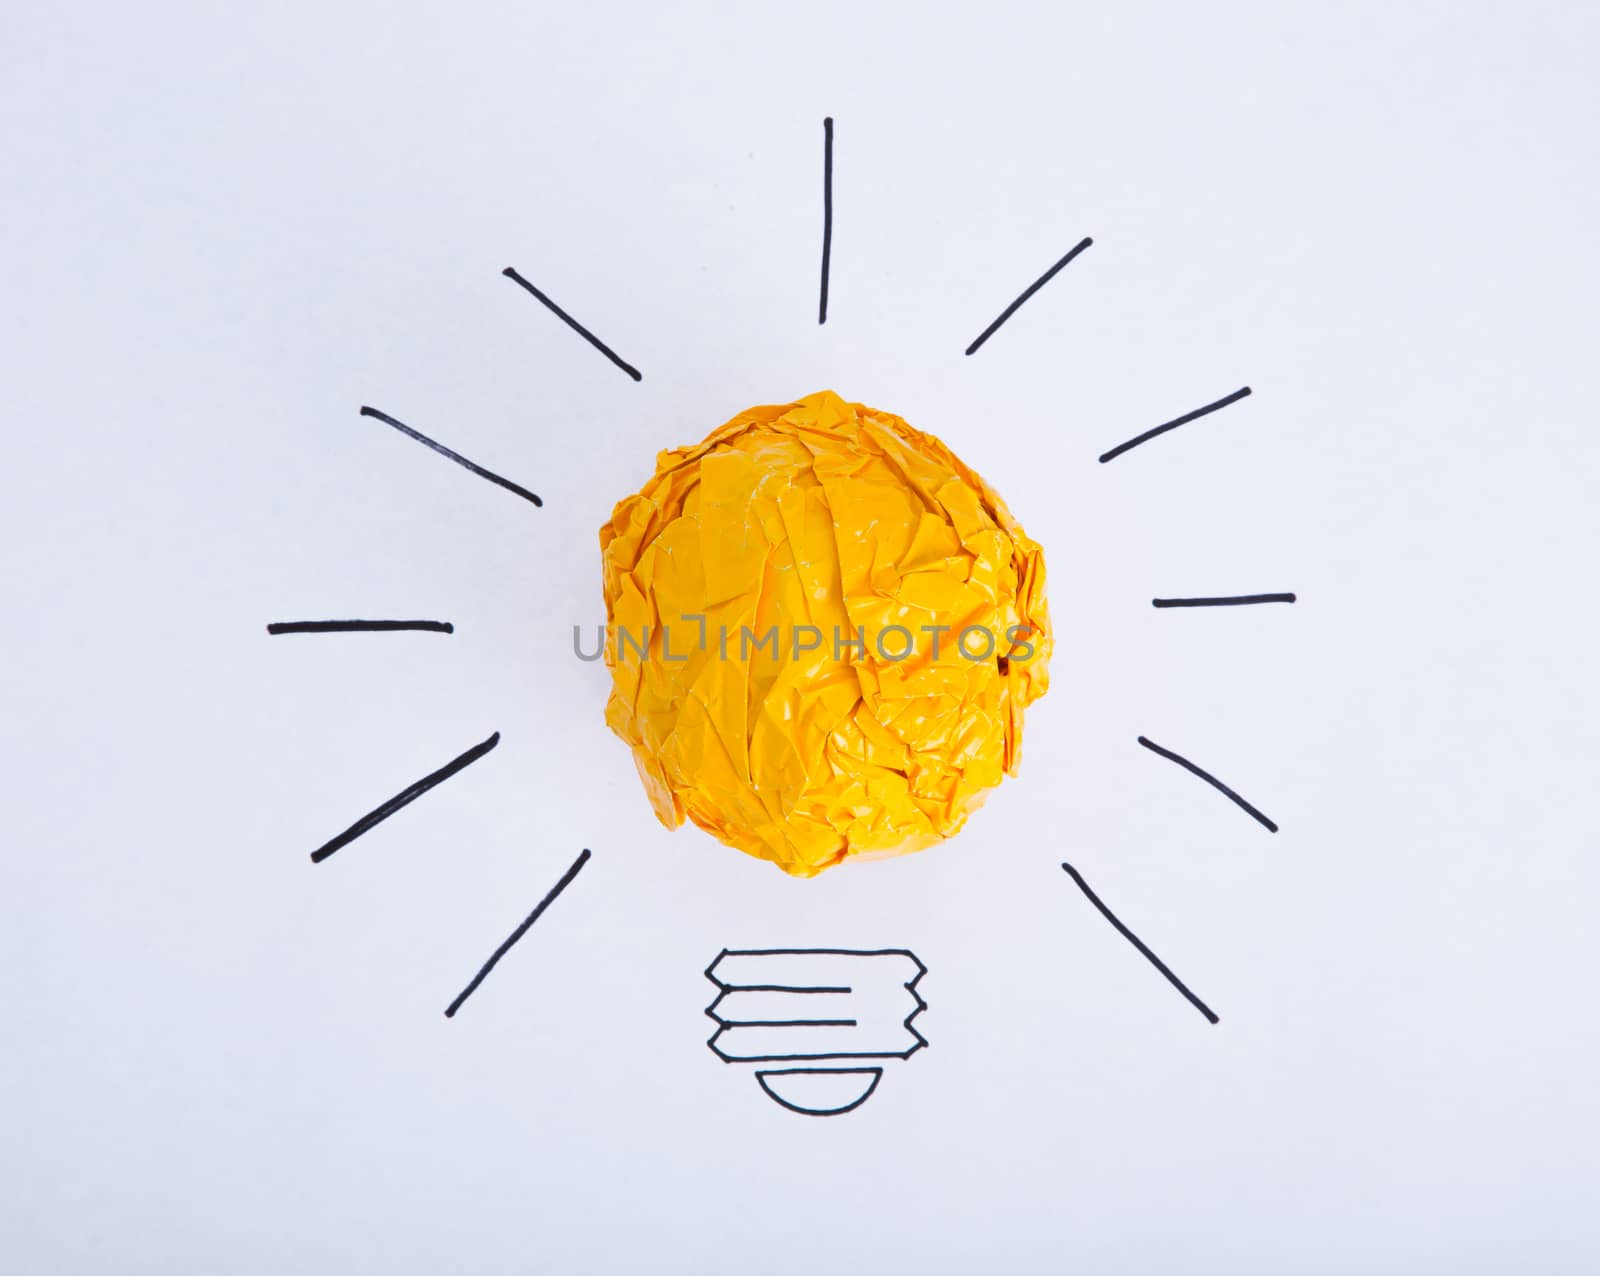 Inspiration concept crumpled color paper light bulb by tehcheesiong